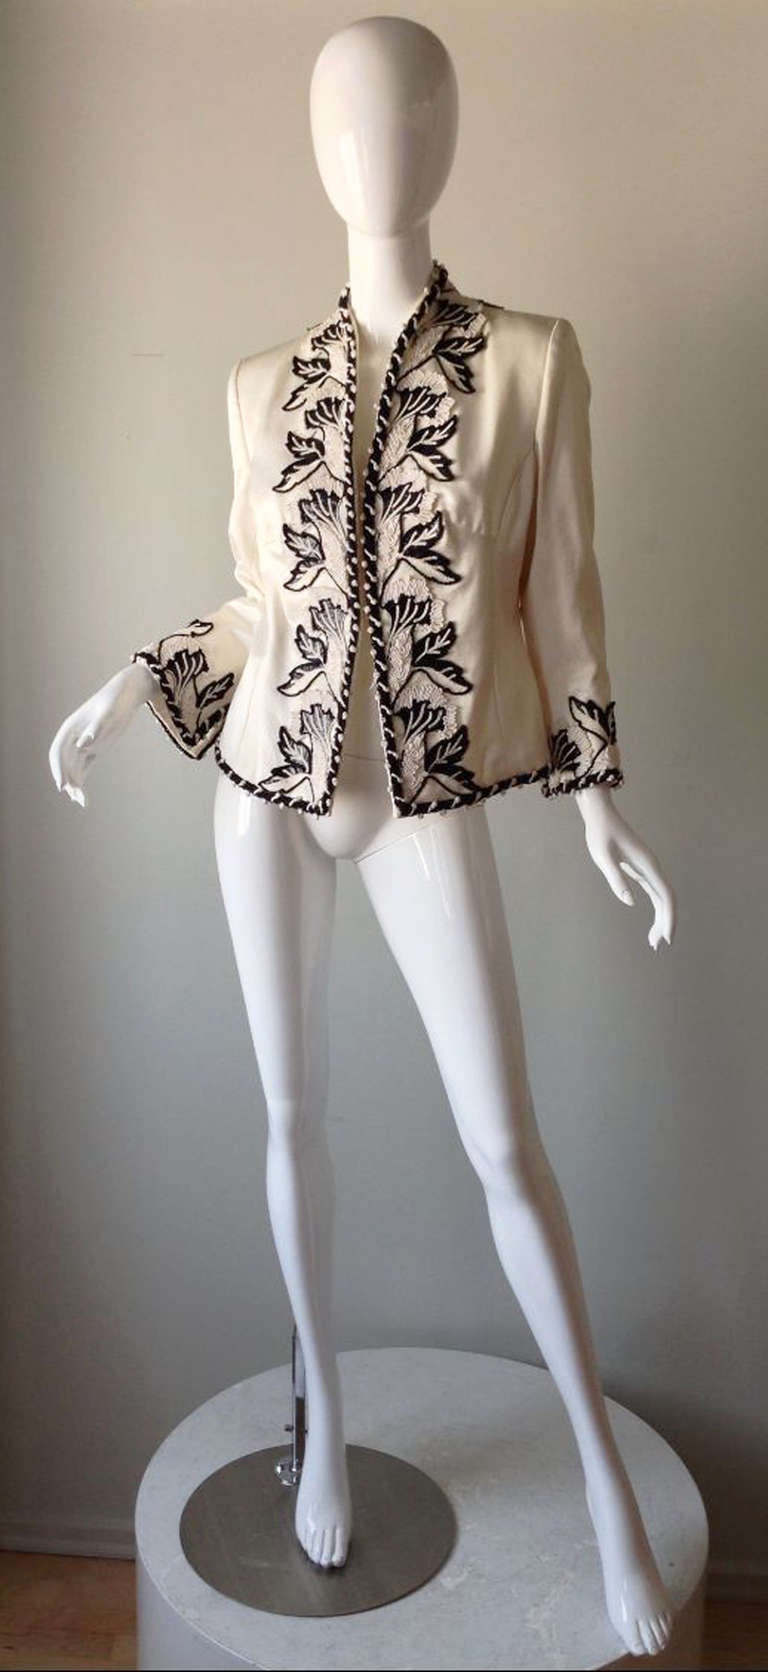 A fine vintage Odicini haute couture embroidered jacket. Exquisite ivory ribbed silk fabric item features elaborate Lesage embroidery front and trim. Item fully silk lined with hidden hook closures. Appears unworn.